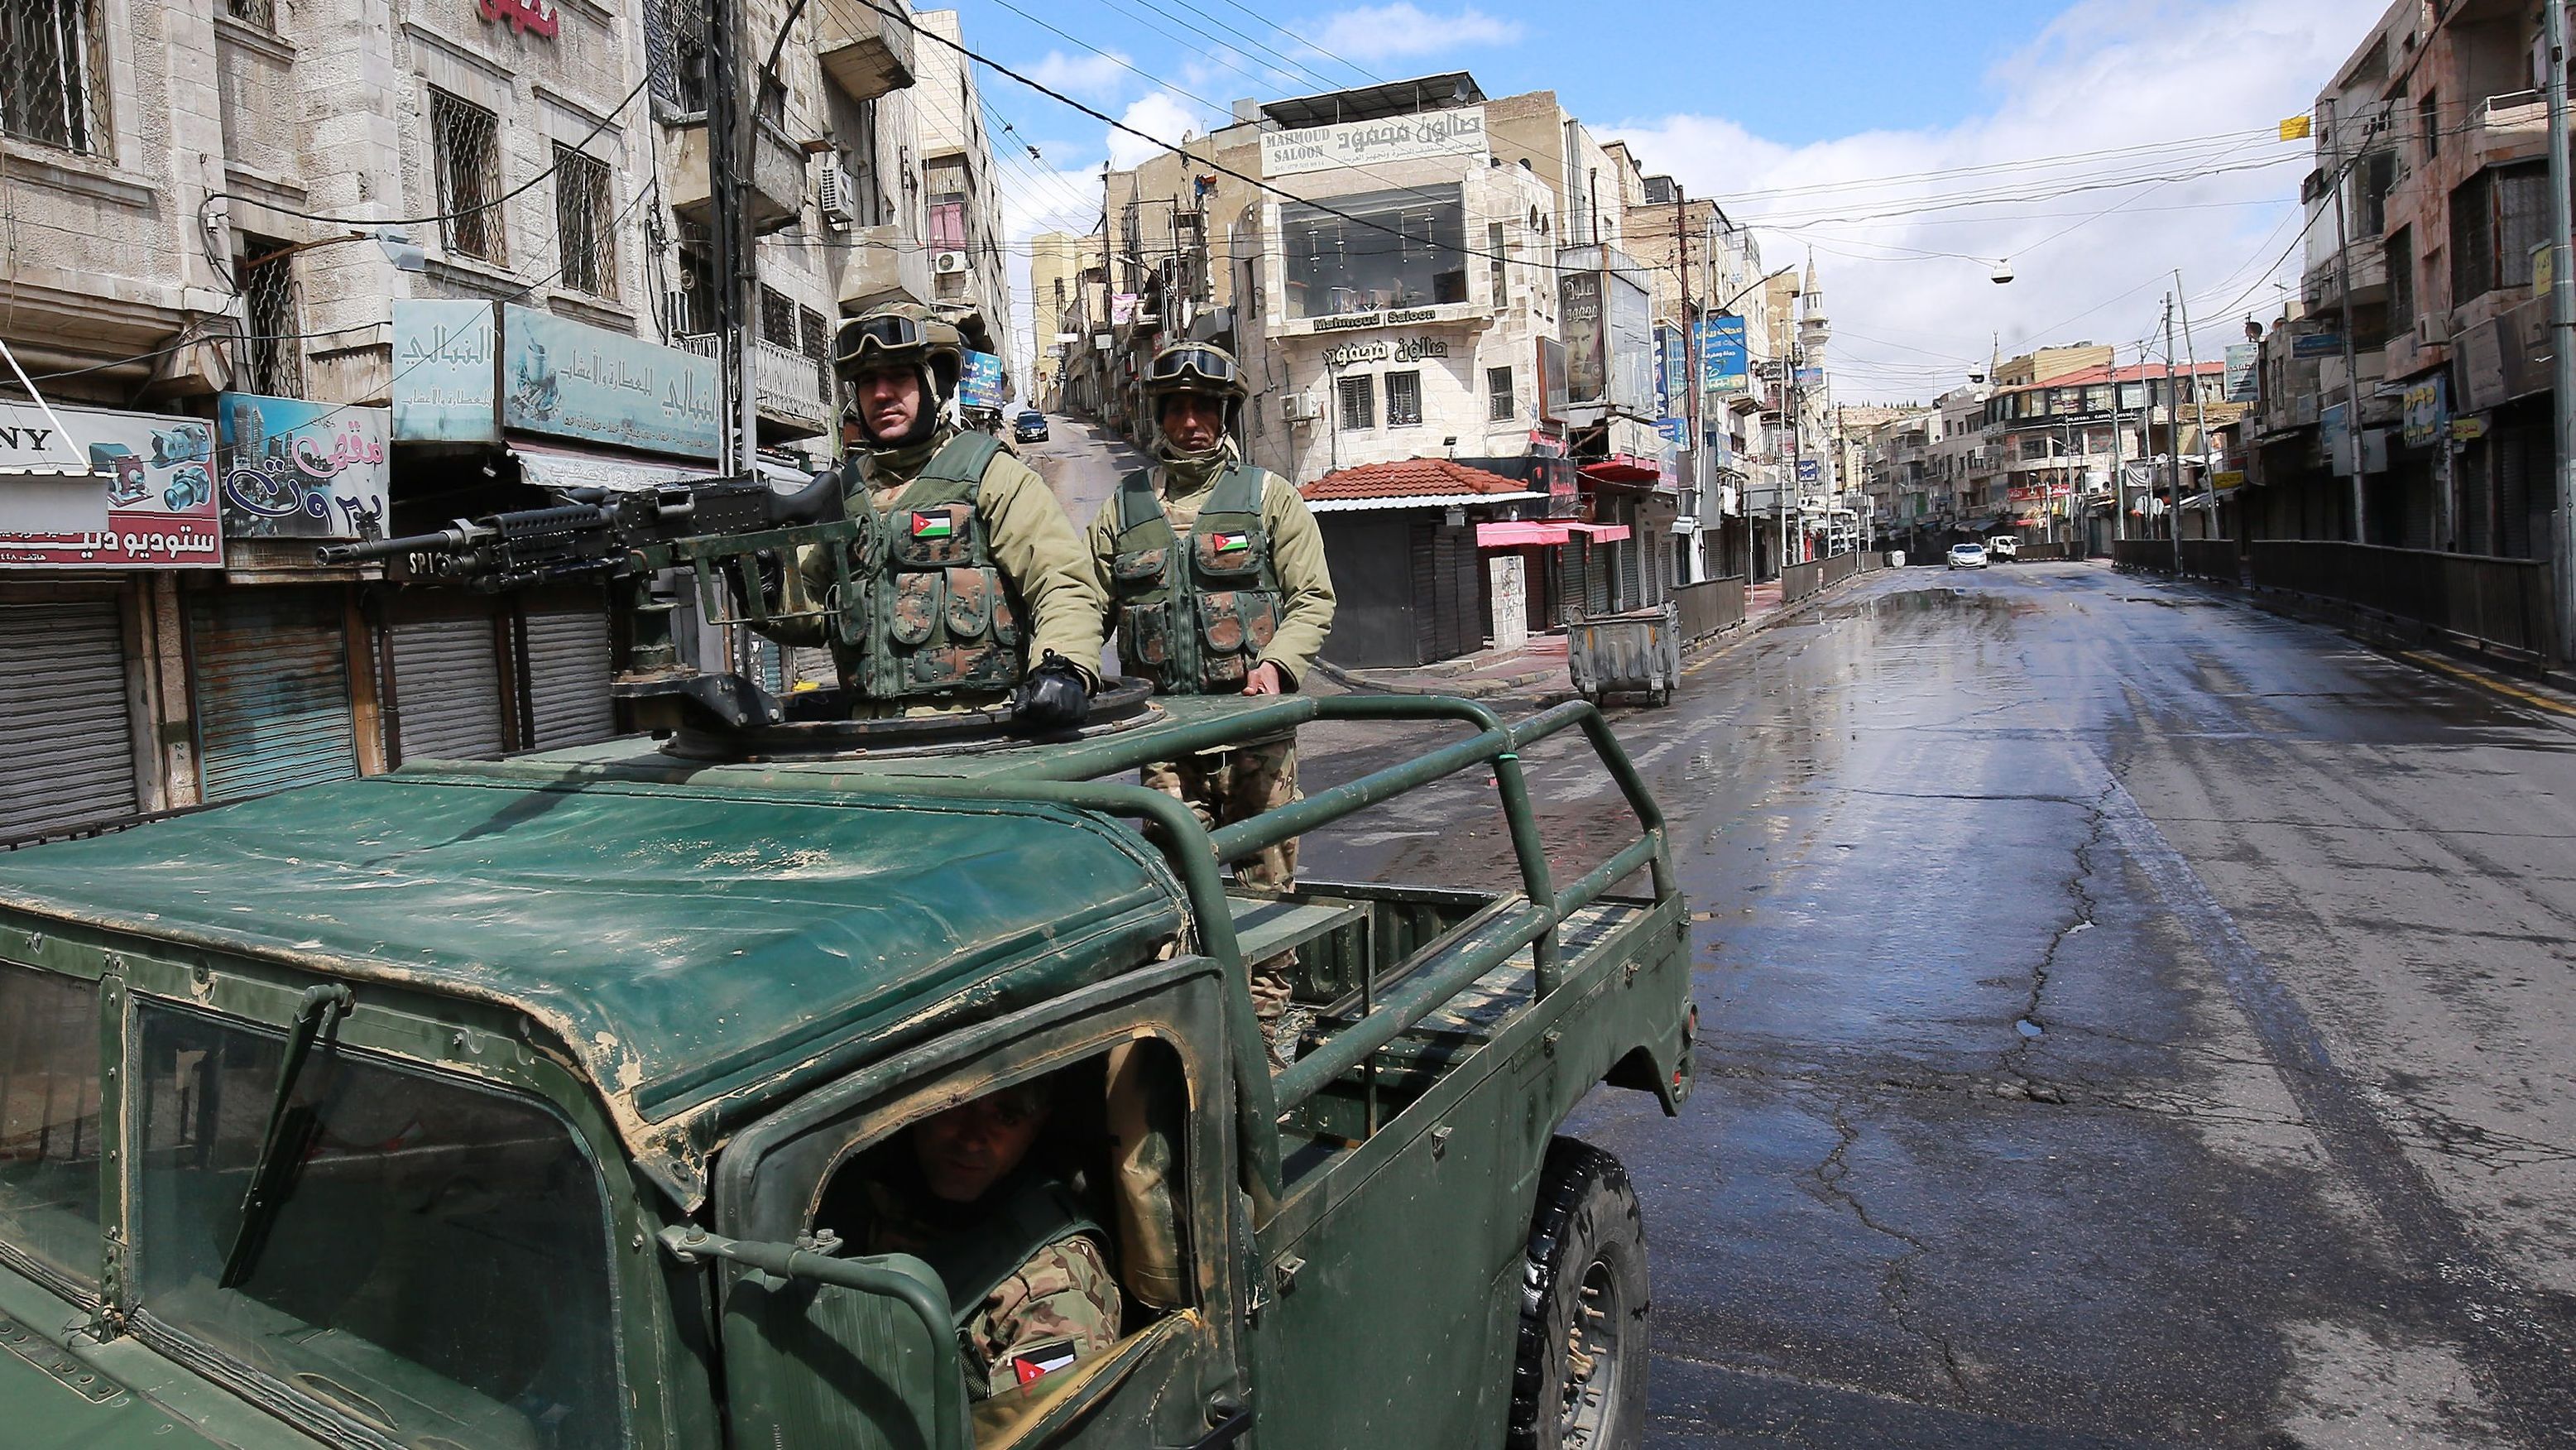 Soldiers patrol atop a military vehicle on deserted street in Amman.